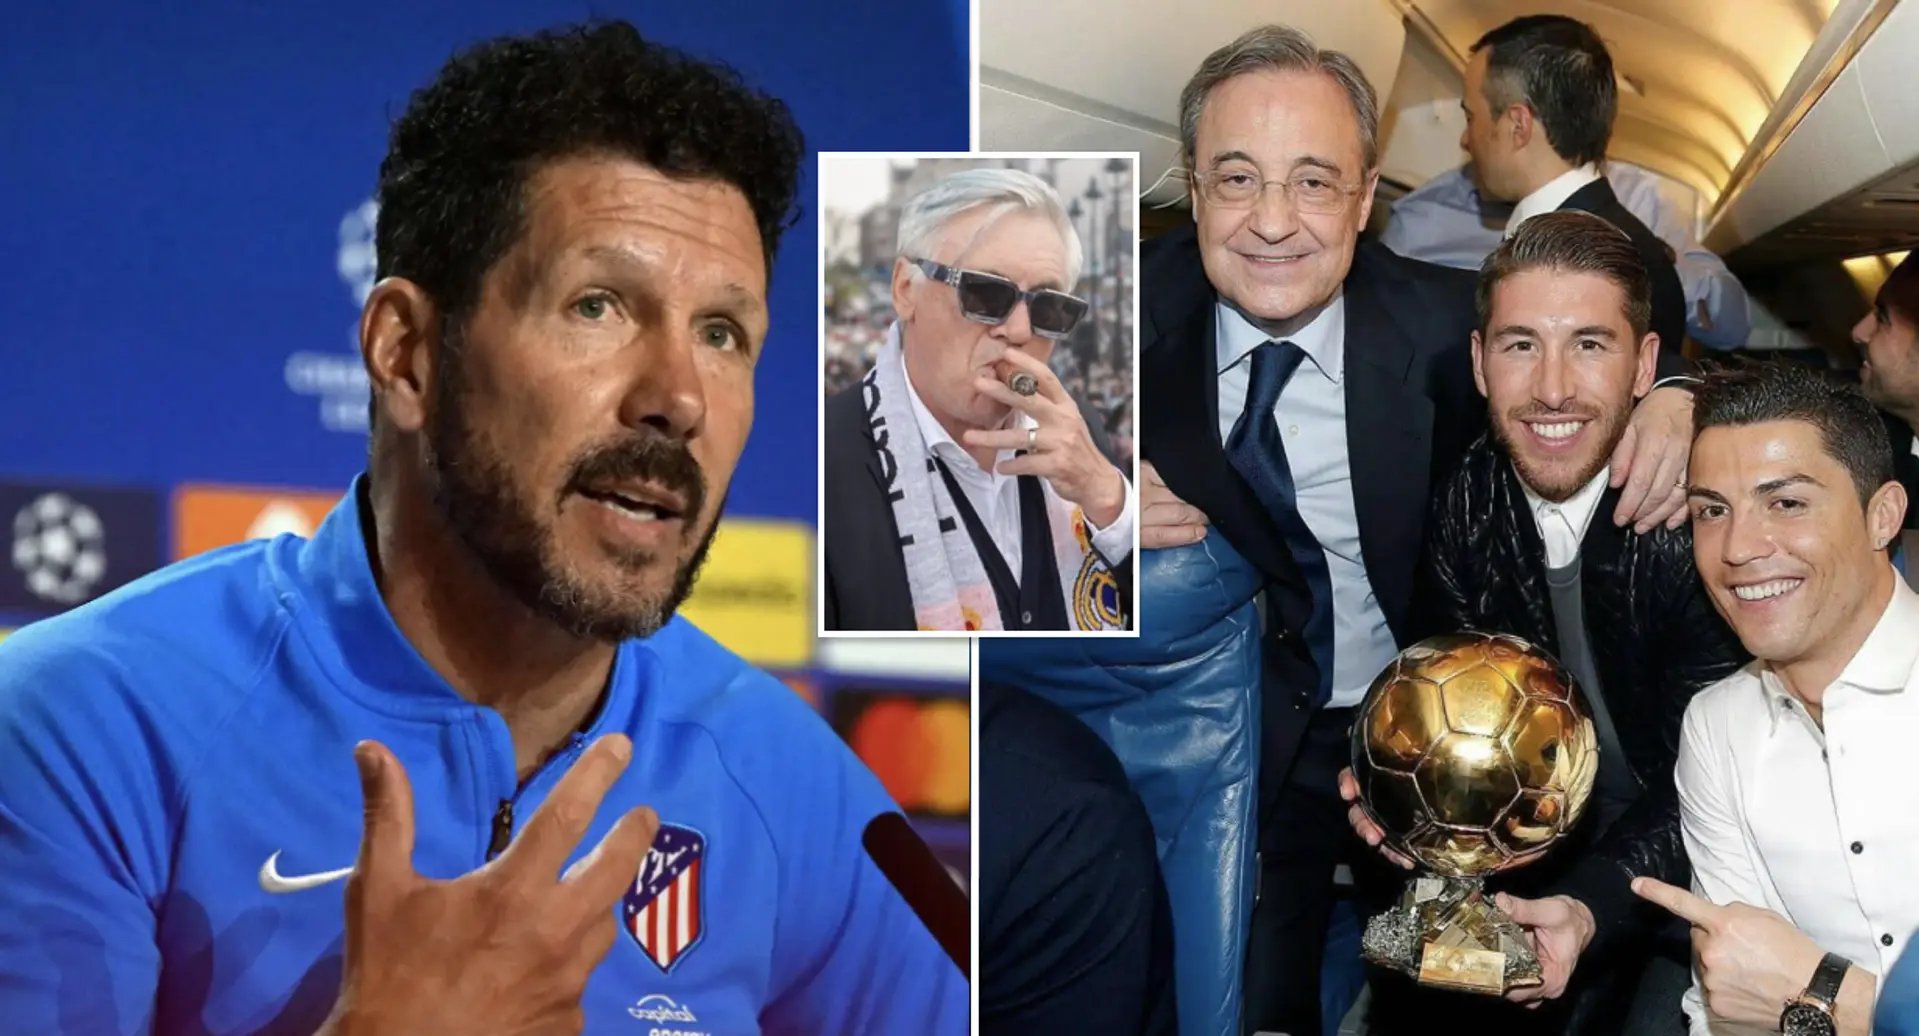 'Ronaldo left, Benzema left, Casillas left, but they keep going': Diego Simeone on what makes Real Madrid best club in the world